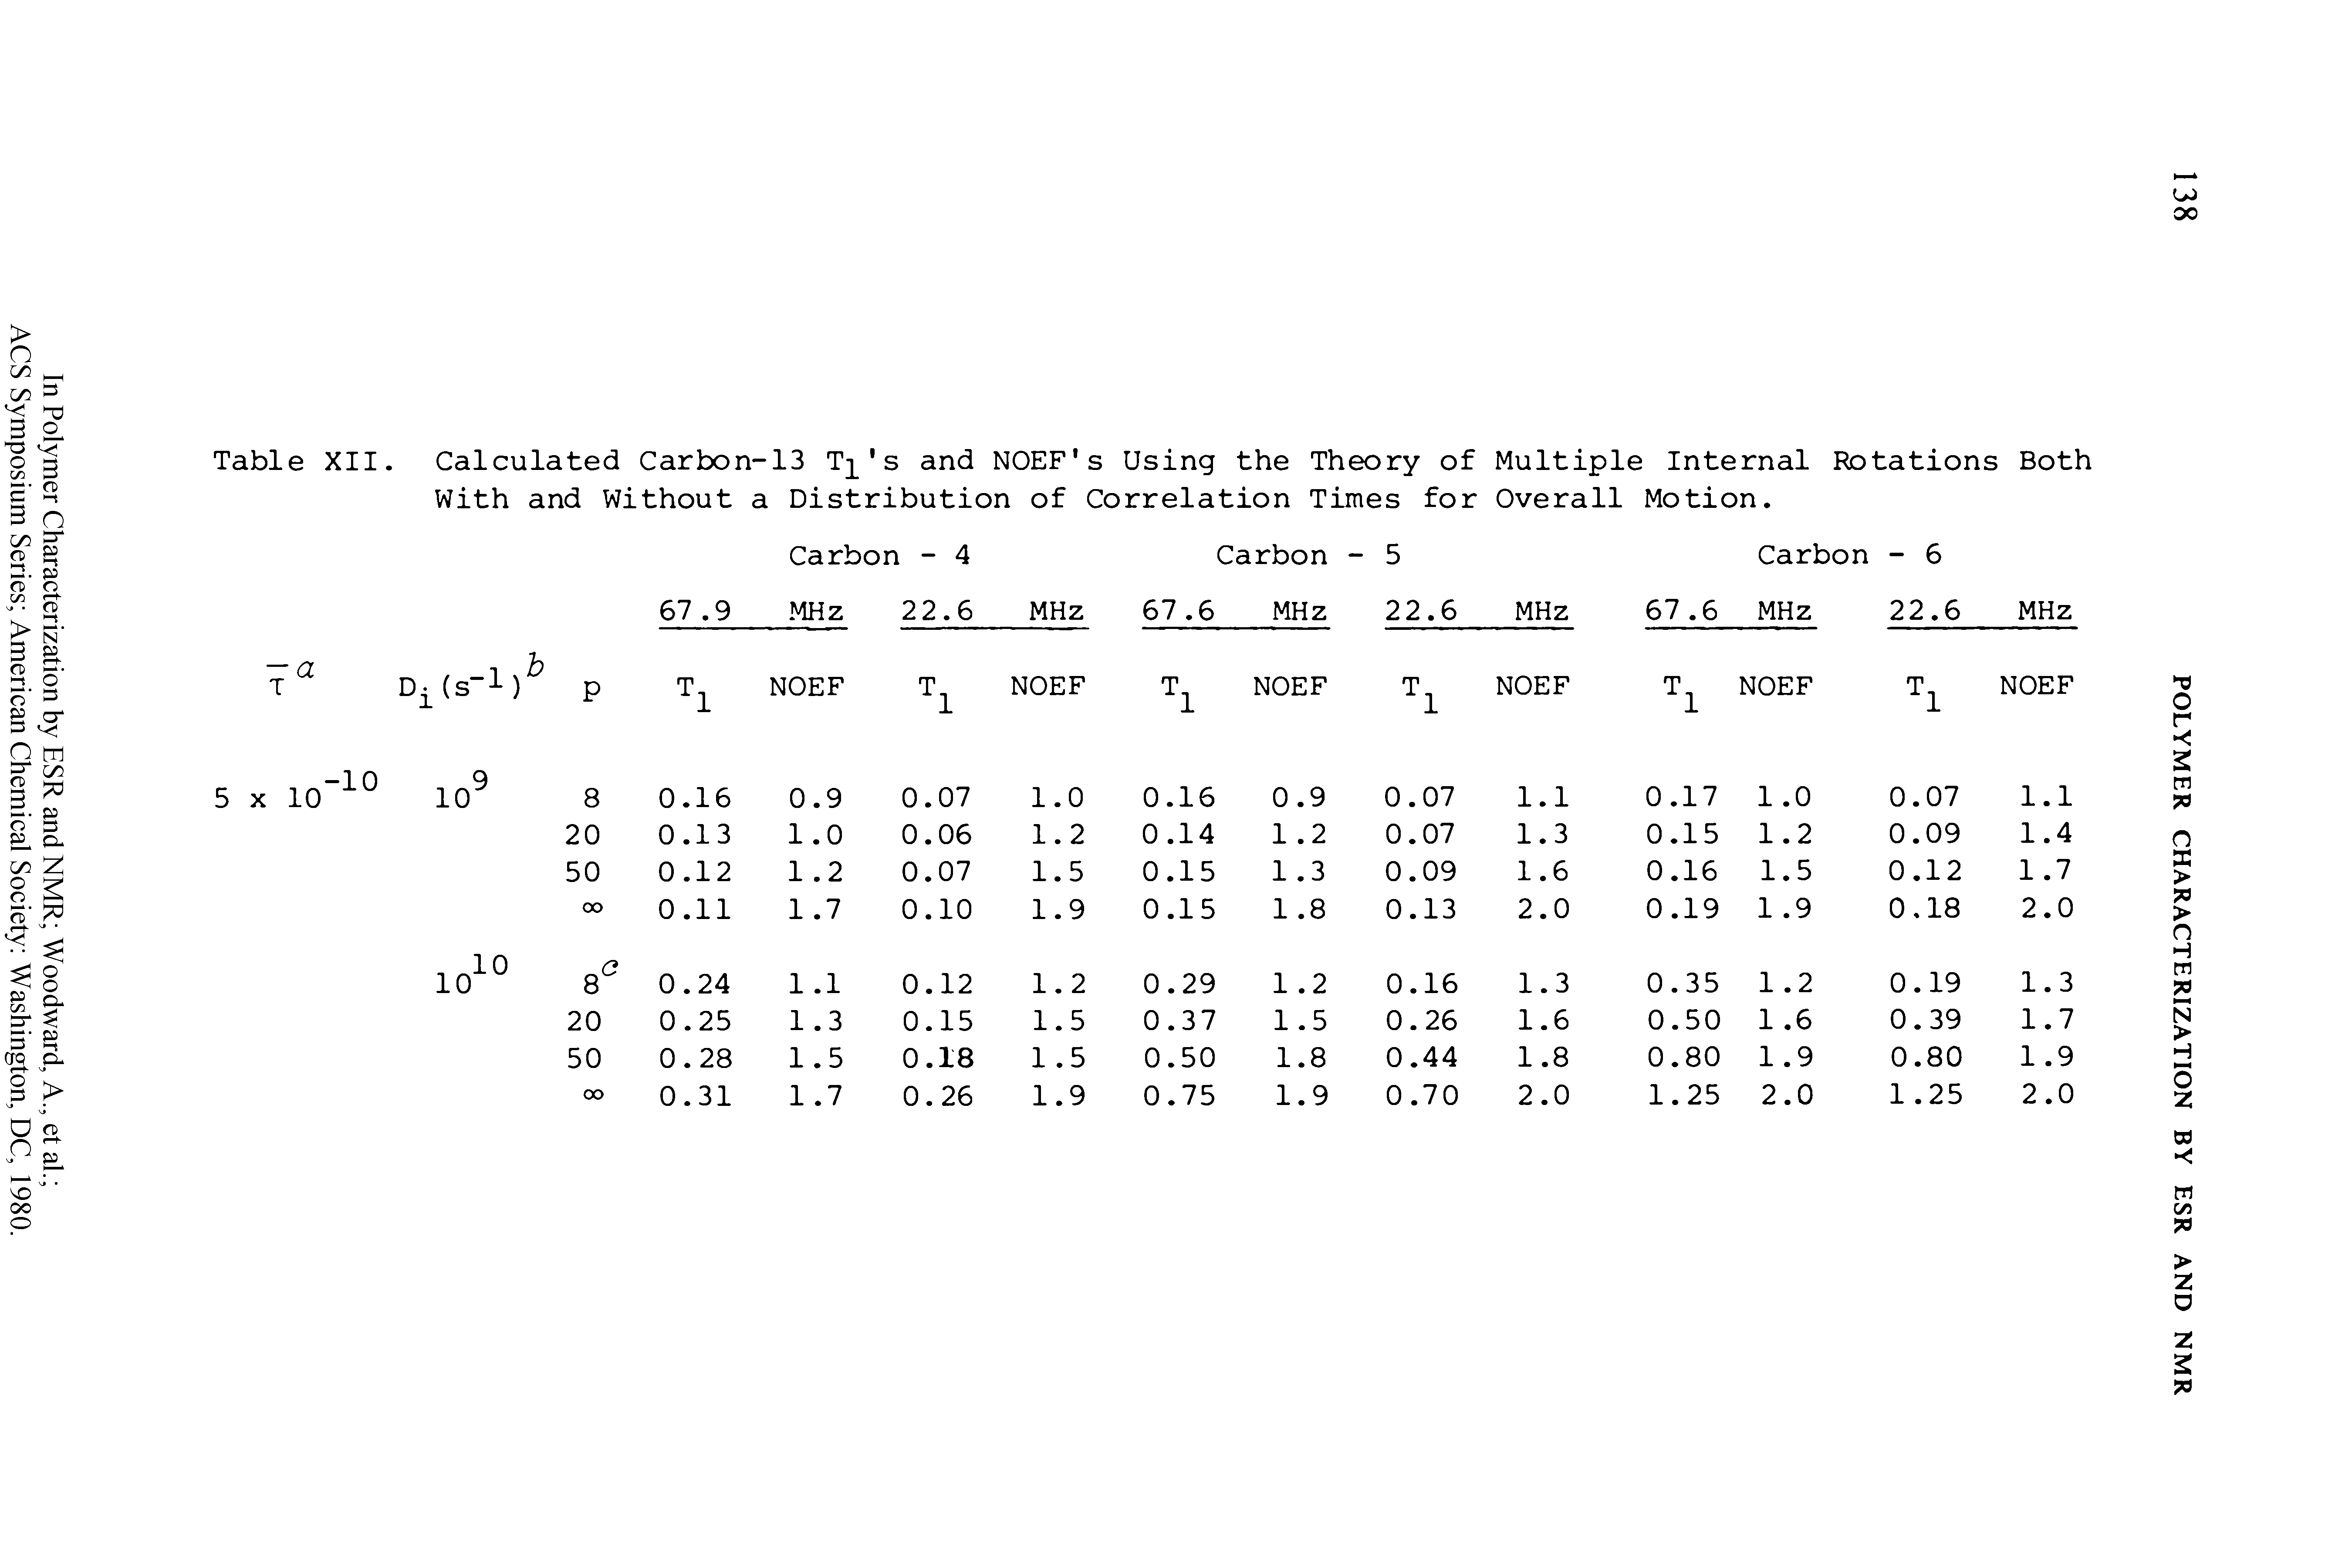 Table XII. Calculated Carbon-13 T] s and NOEF s Using the Theory of Multiple Internal Rotations Both With and Without a Distribution of Correlation Times for Overall Motion.